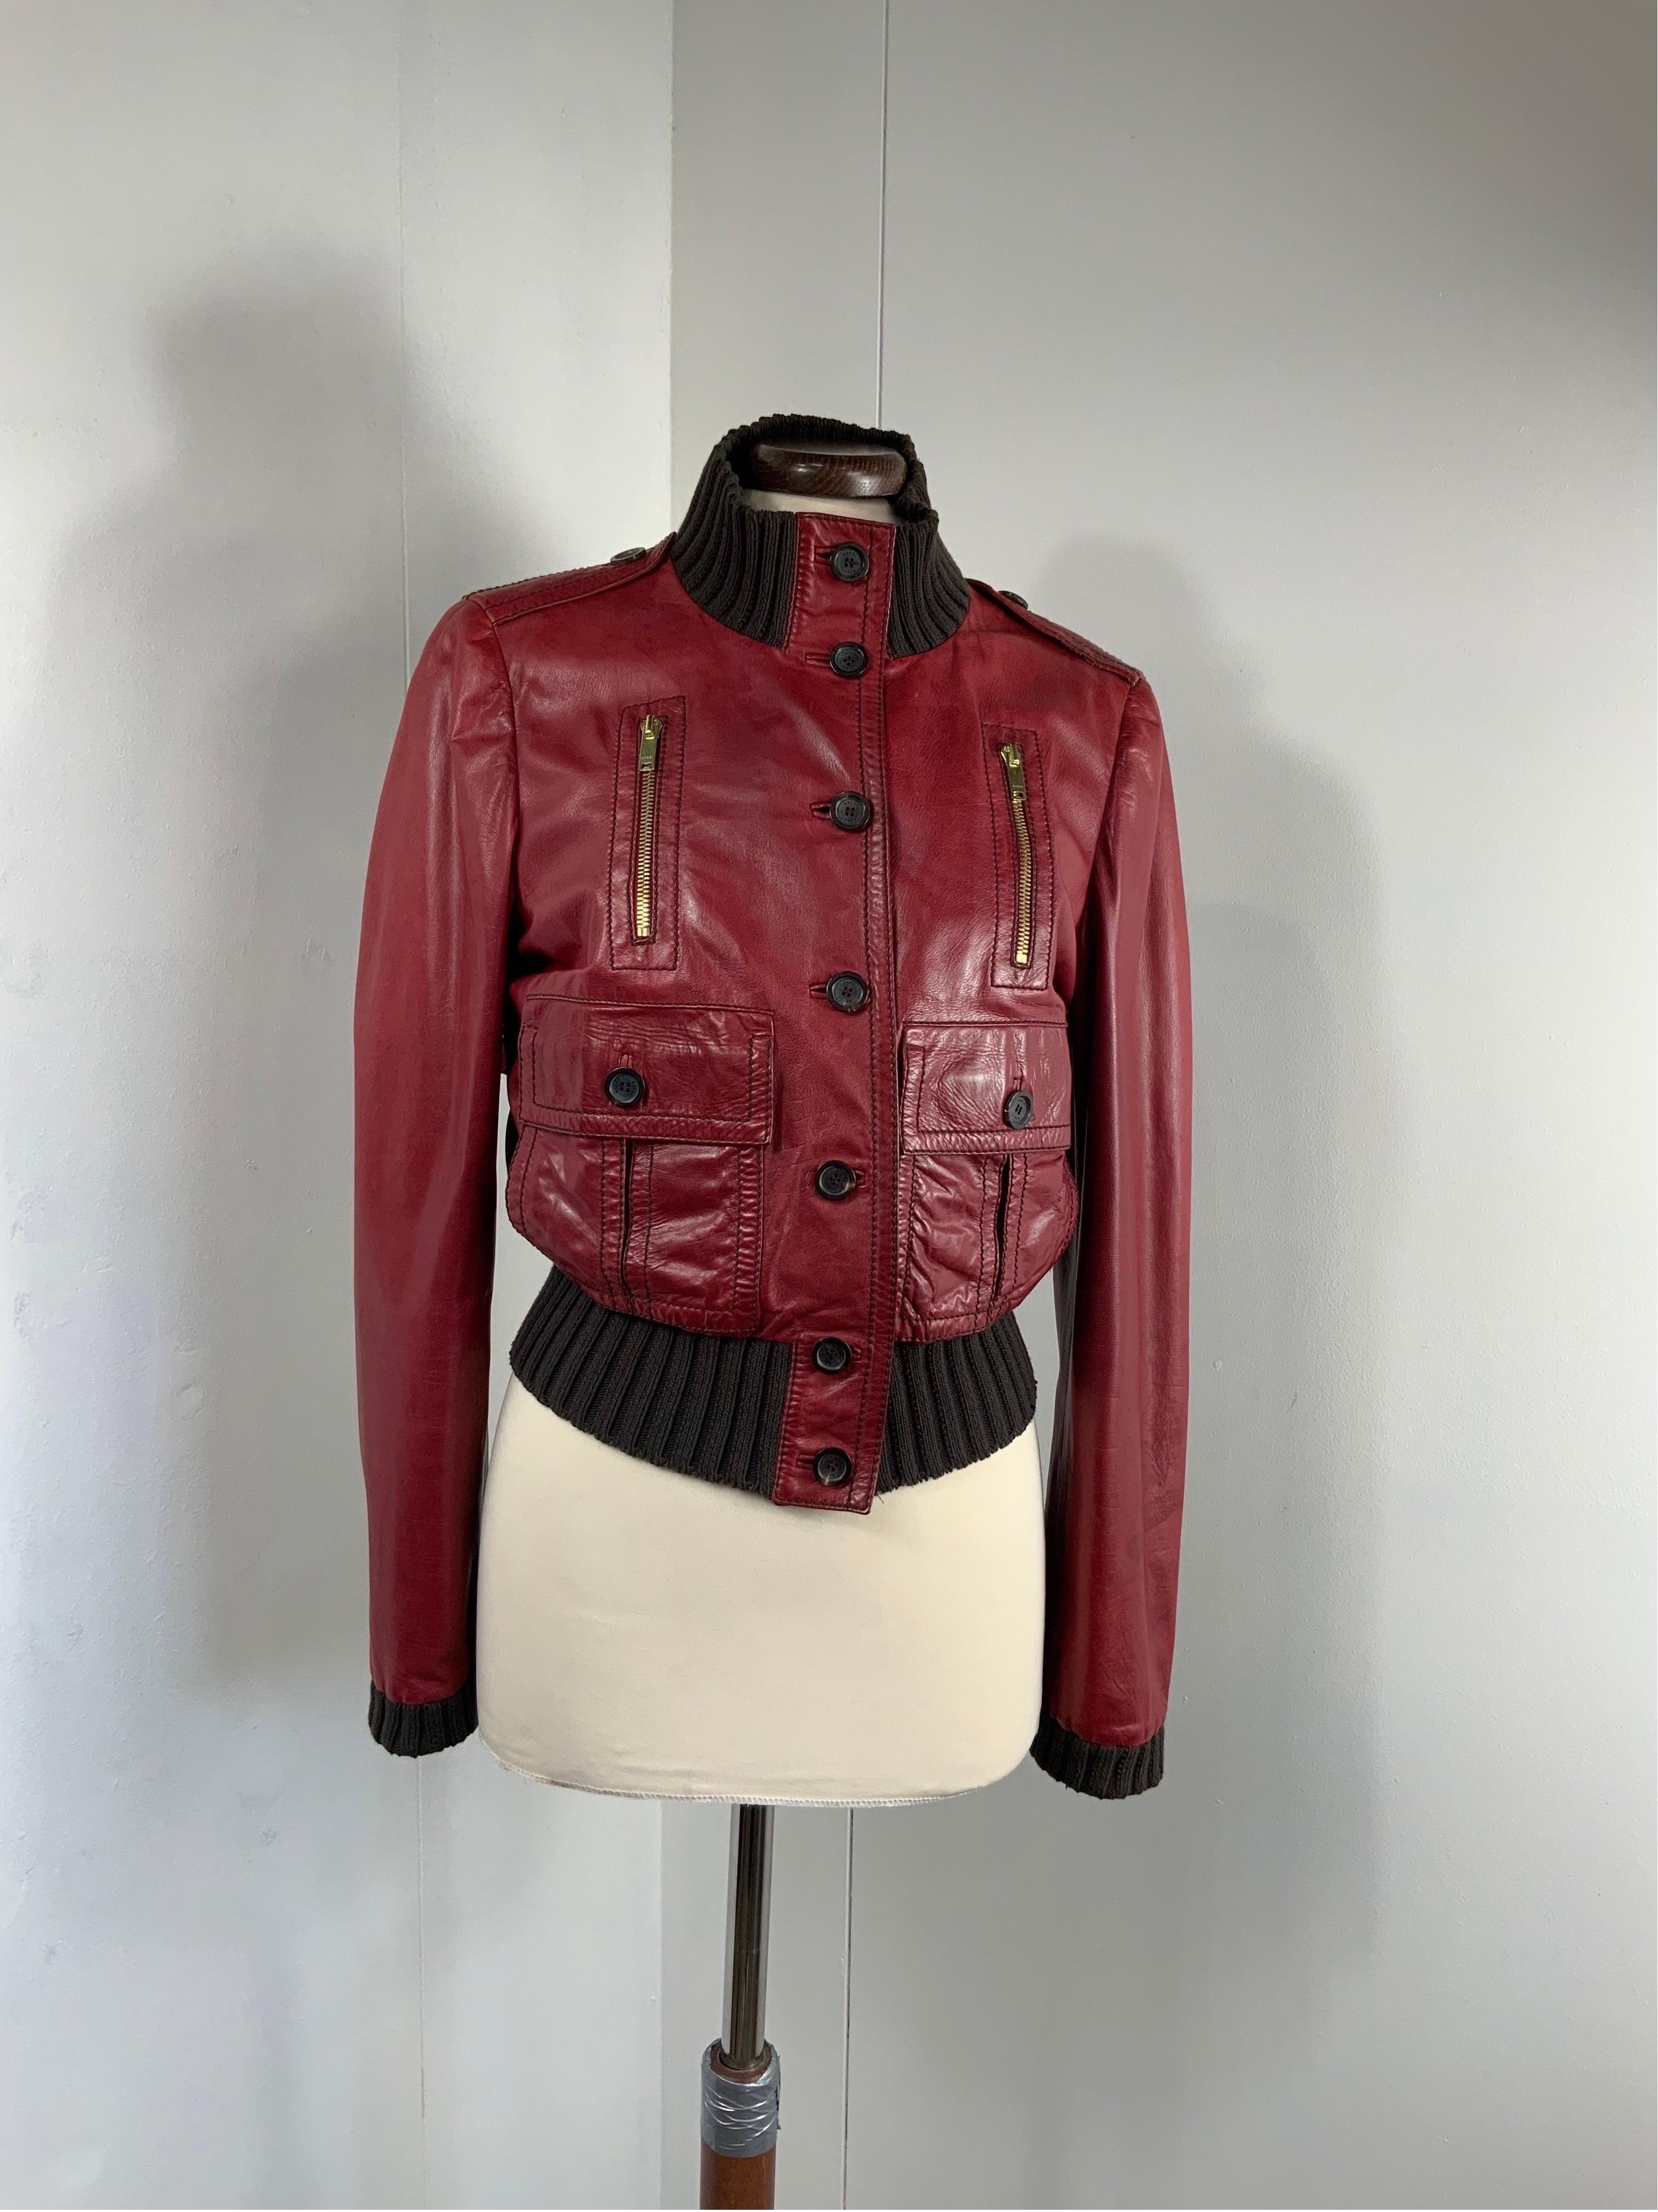 Gucci leather Jacket.
Frida Giannini designed this particular bomber model exclusively for Madonna in conjunction with her 2006 Confessions tour and television appearances supporting Confessions on a Dance Floor.
Featuring bordeaux leather, cotton